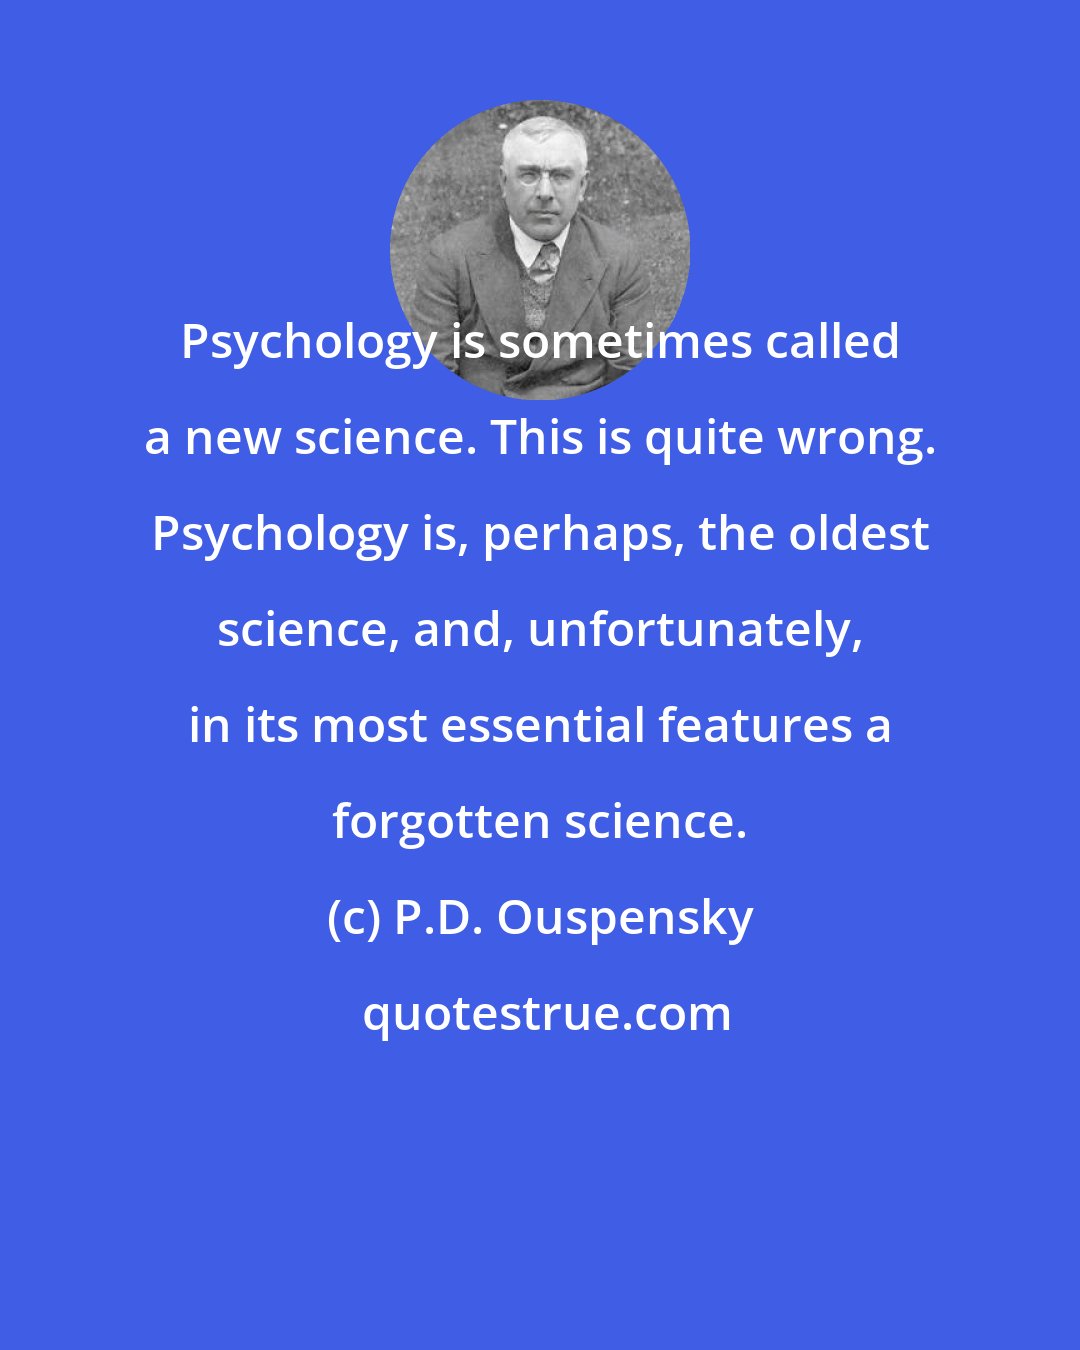 P.D. Ouspensky: Psychology is sometimes called a new science. This is quite wrong. Psychology is, perhaps, the oldest science, and, unfortunately, in its most essential features a forgotten science.